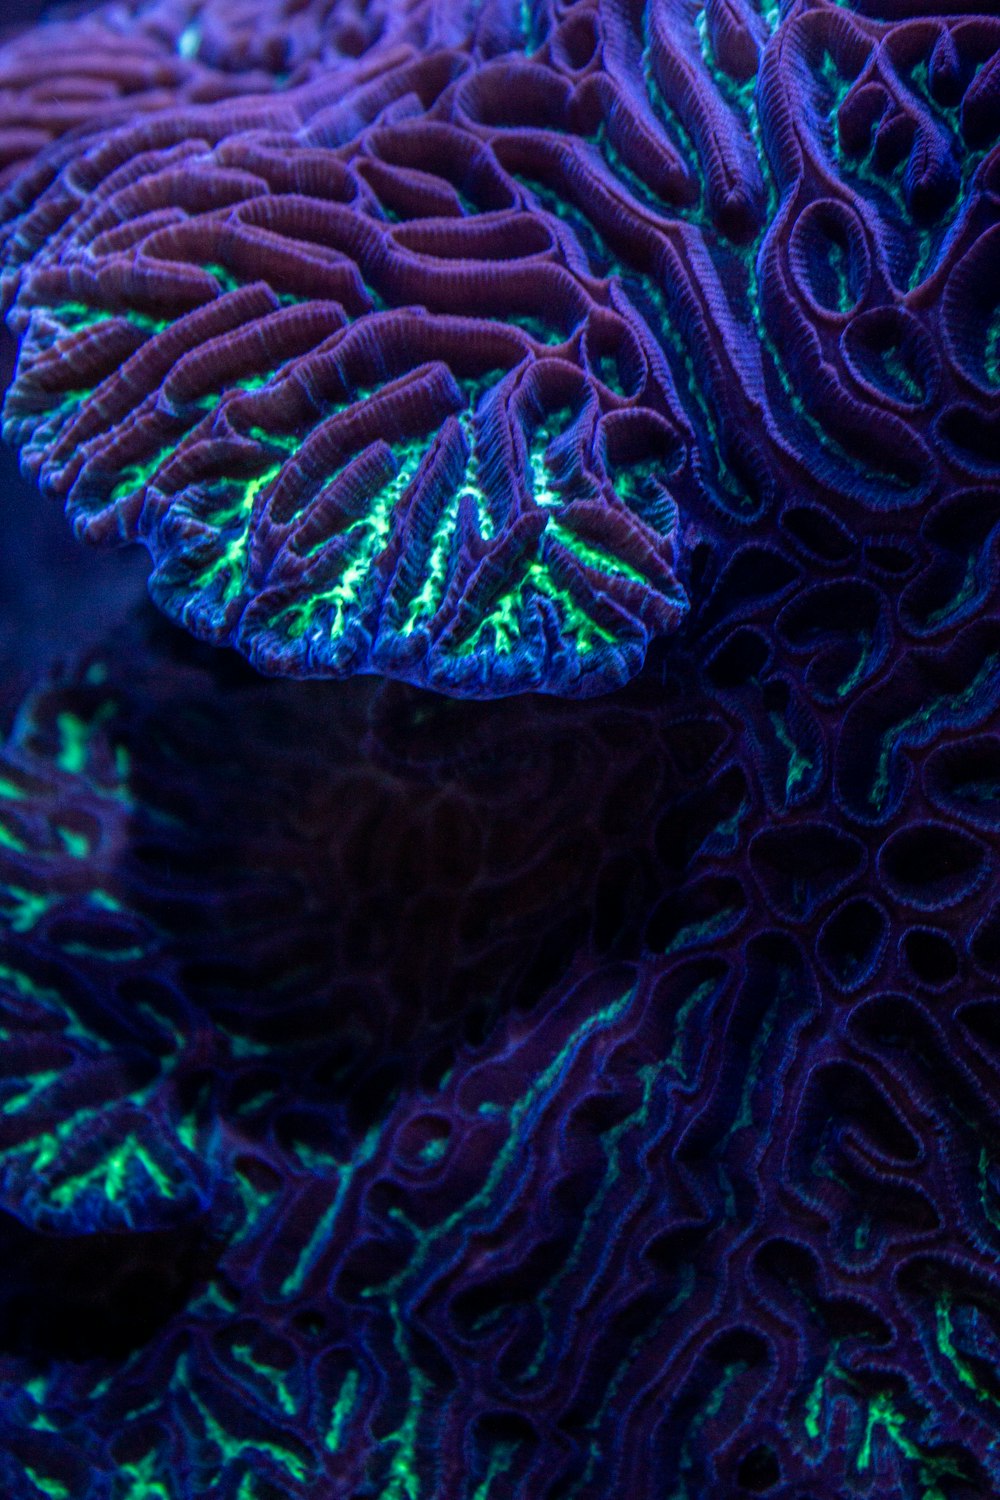 a close up of a purple and green coral